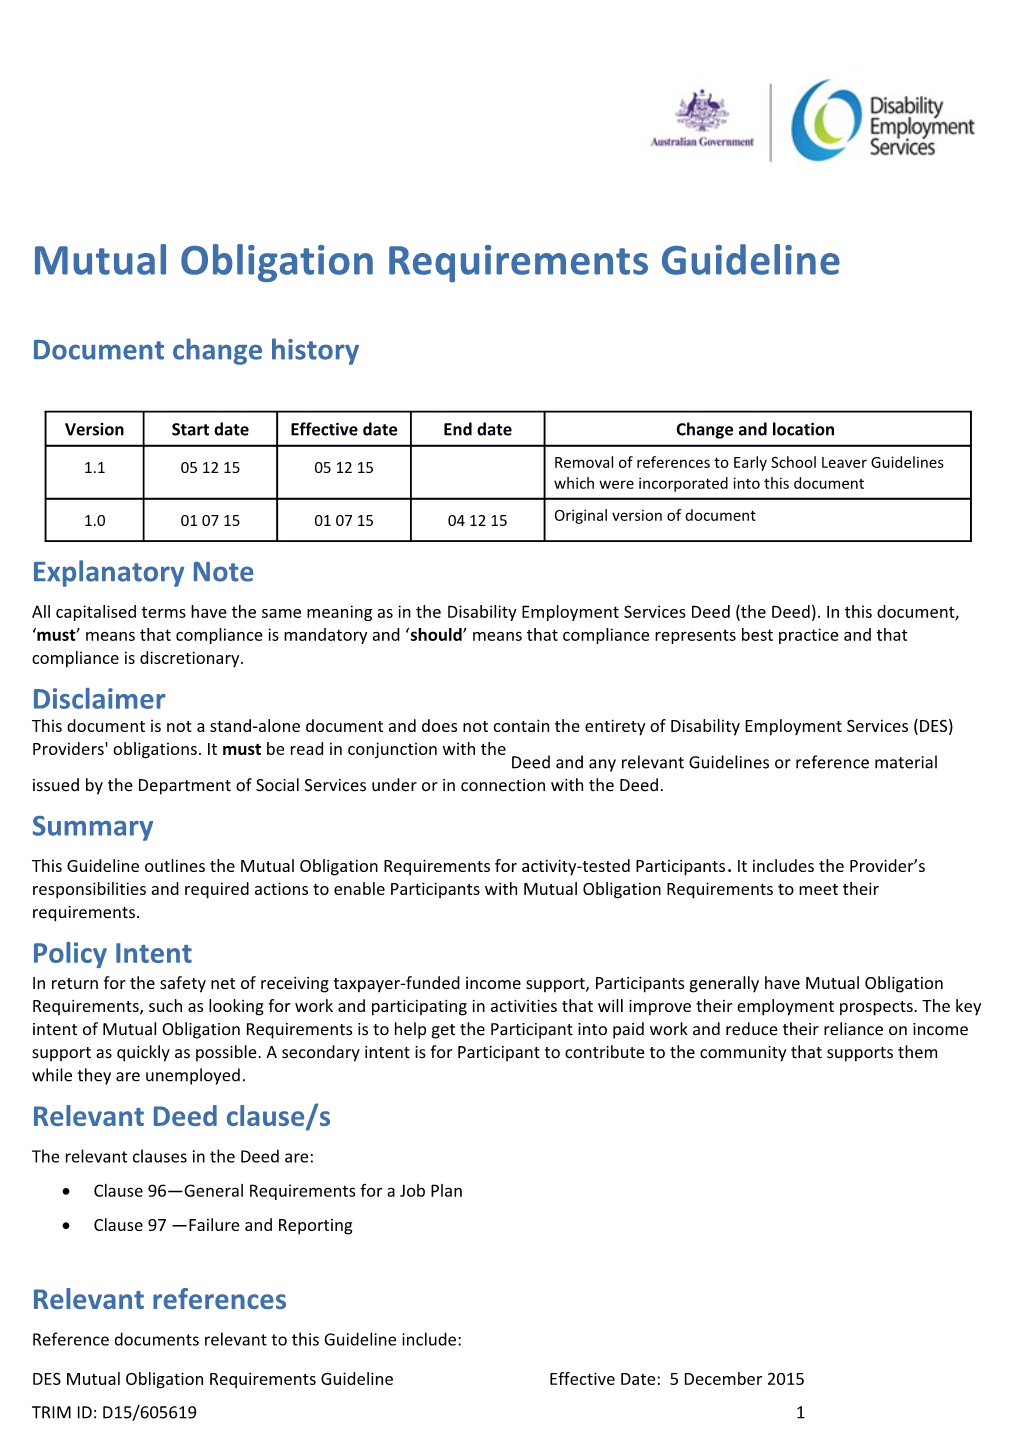 Mutual Obligation Requirements Including Annual Activity Requirements